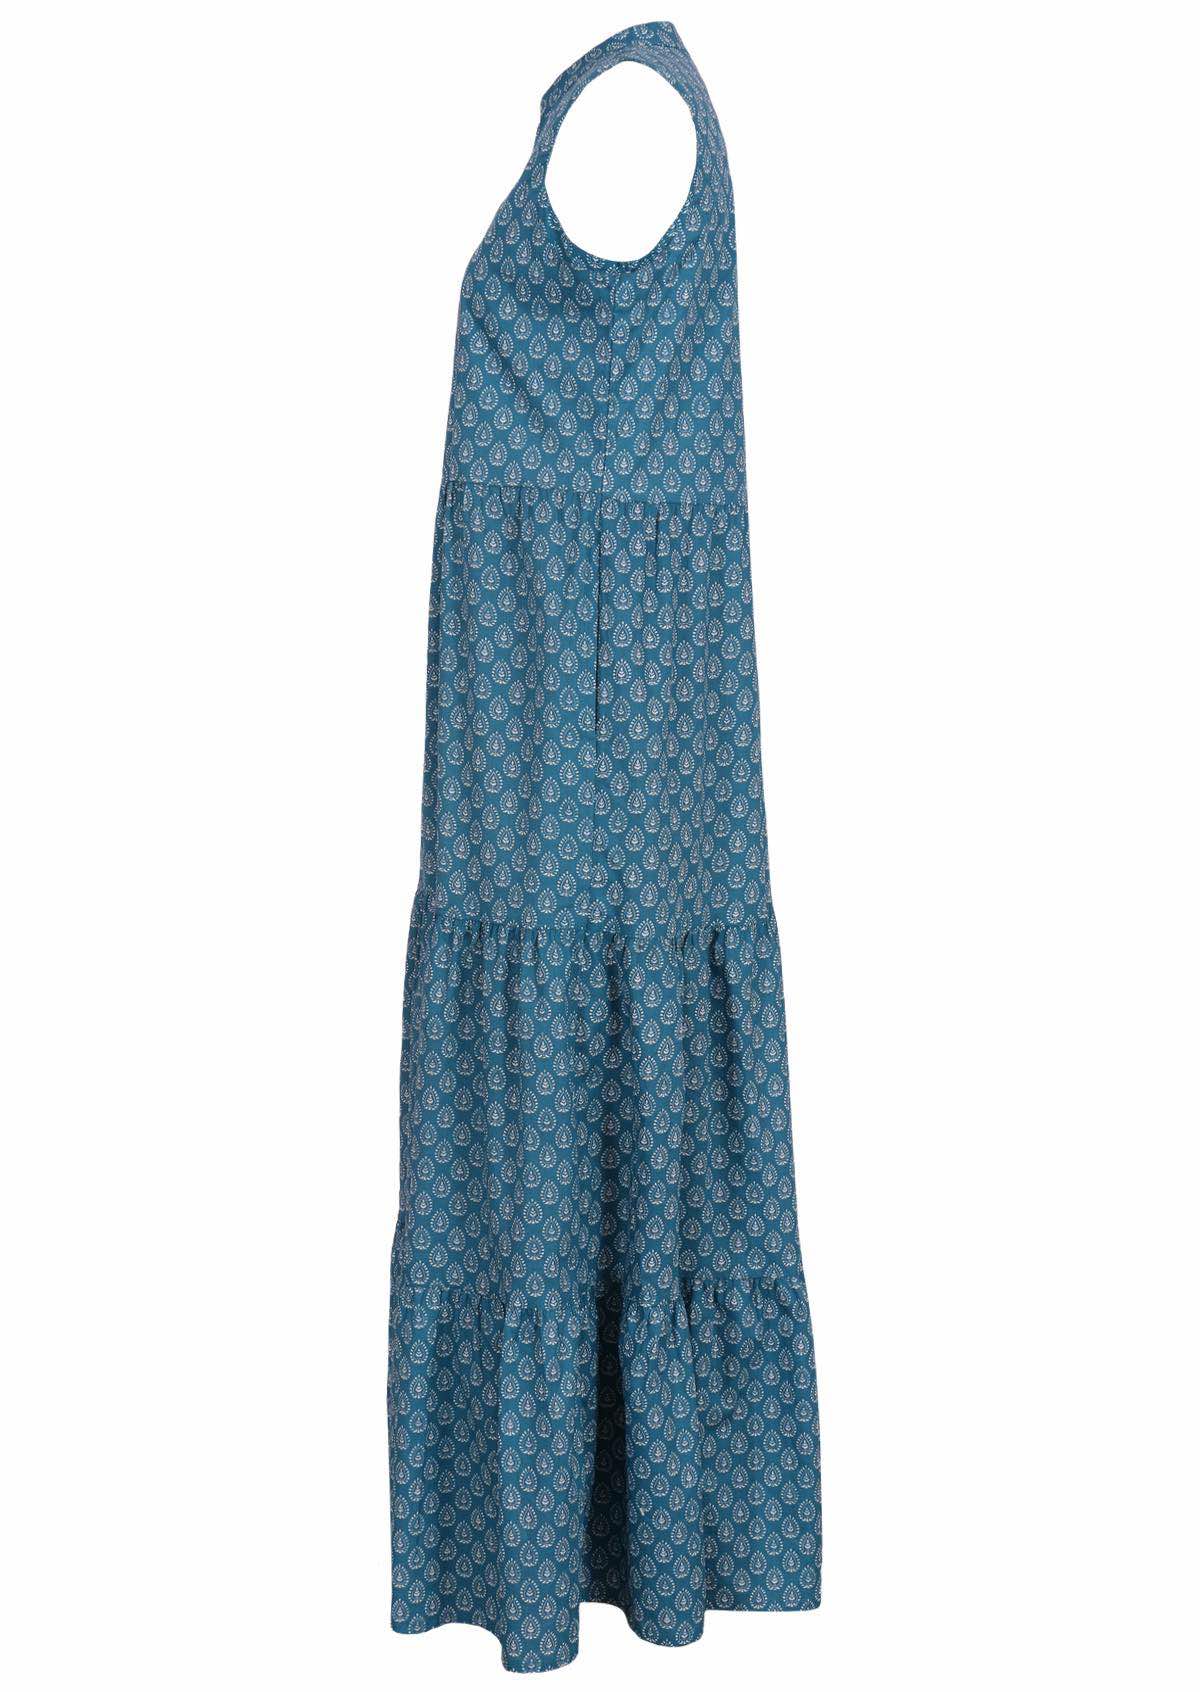 Sleeveless cotton maxi dress with 3 tiered skirt